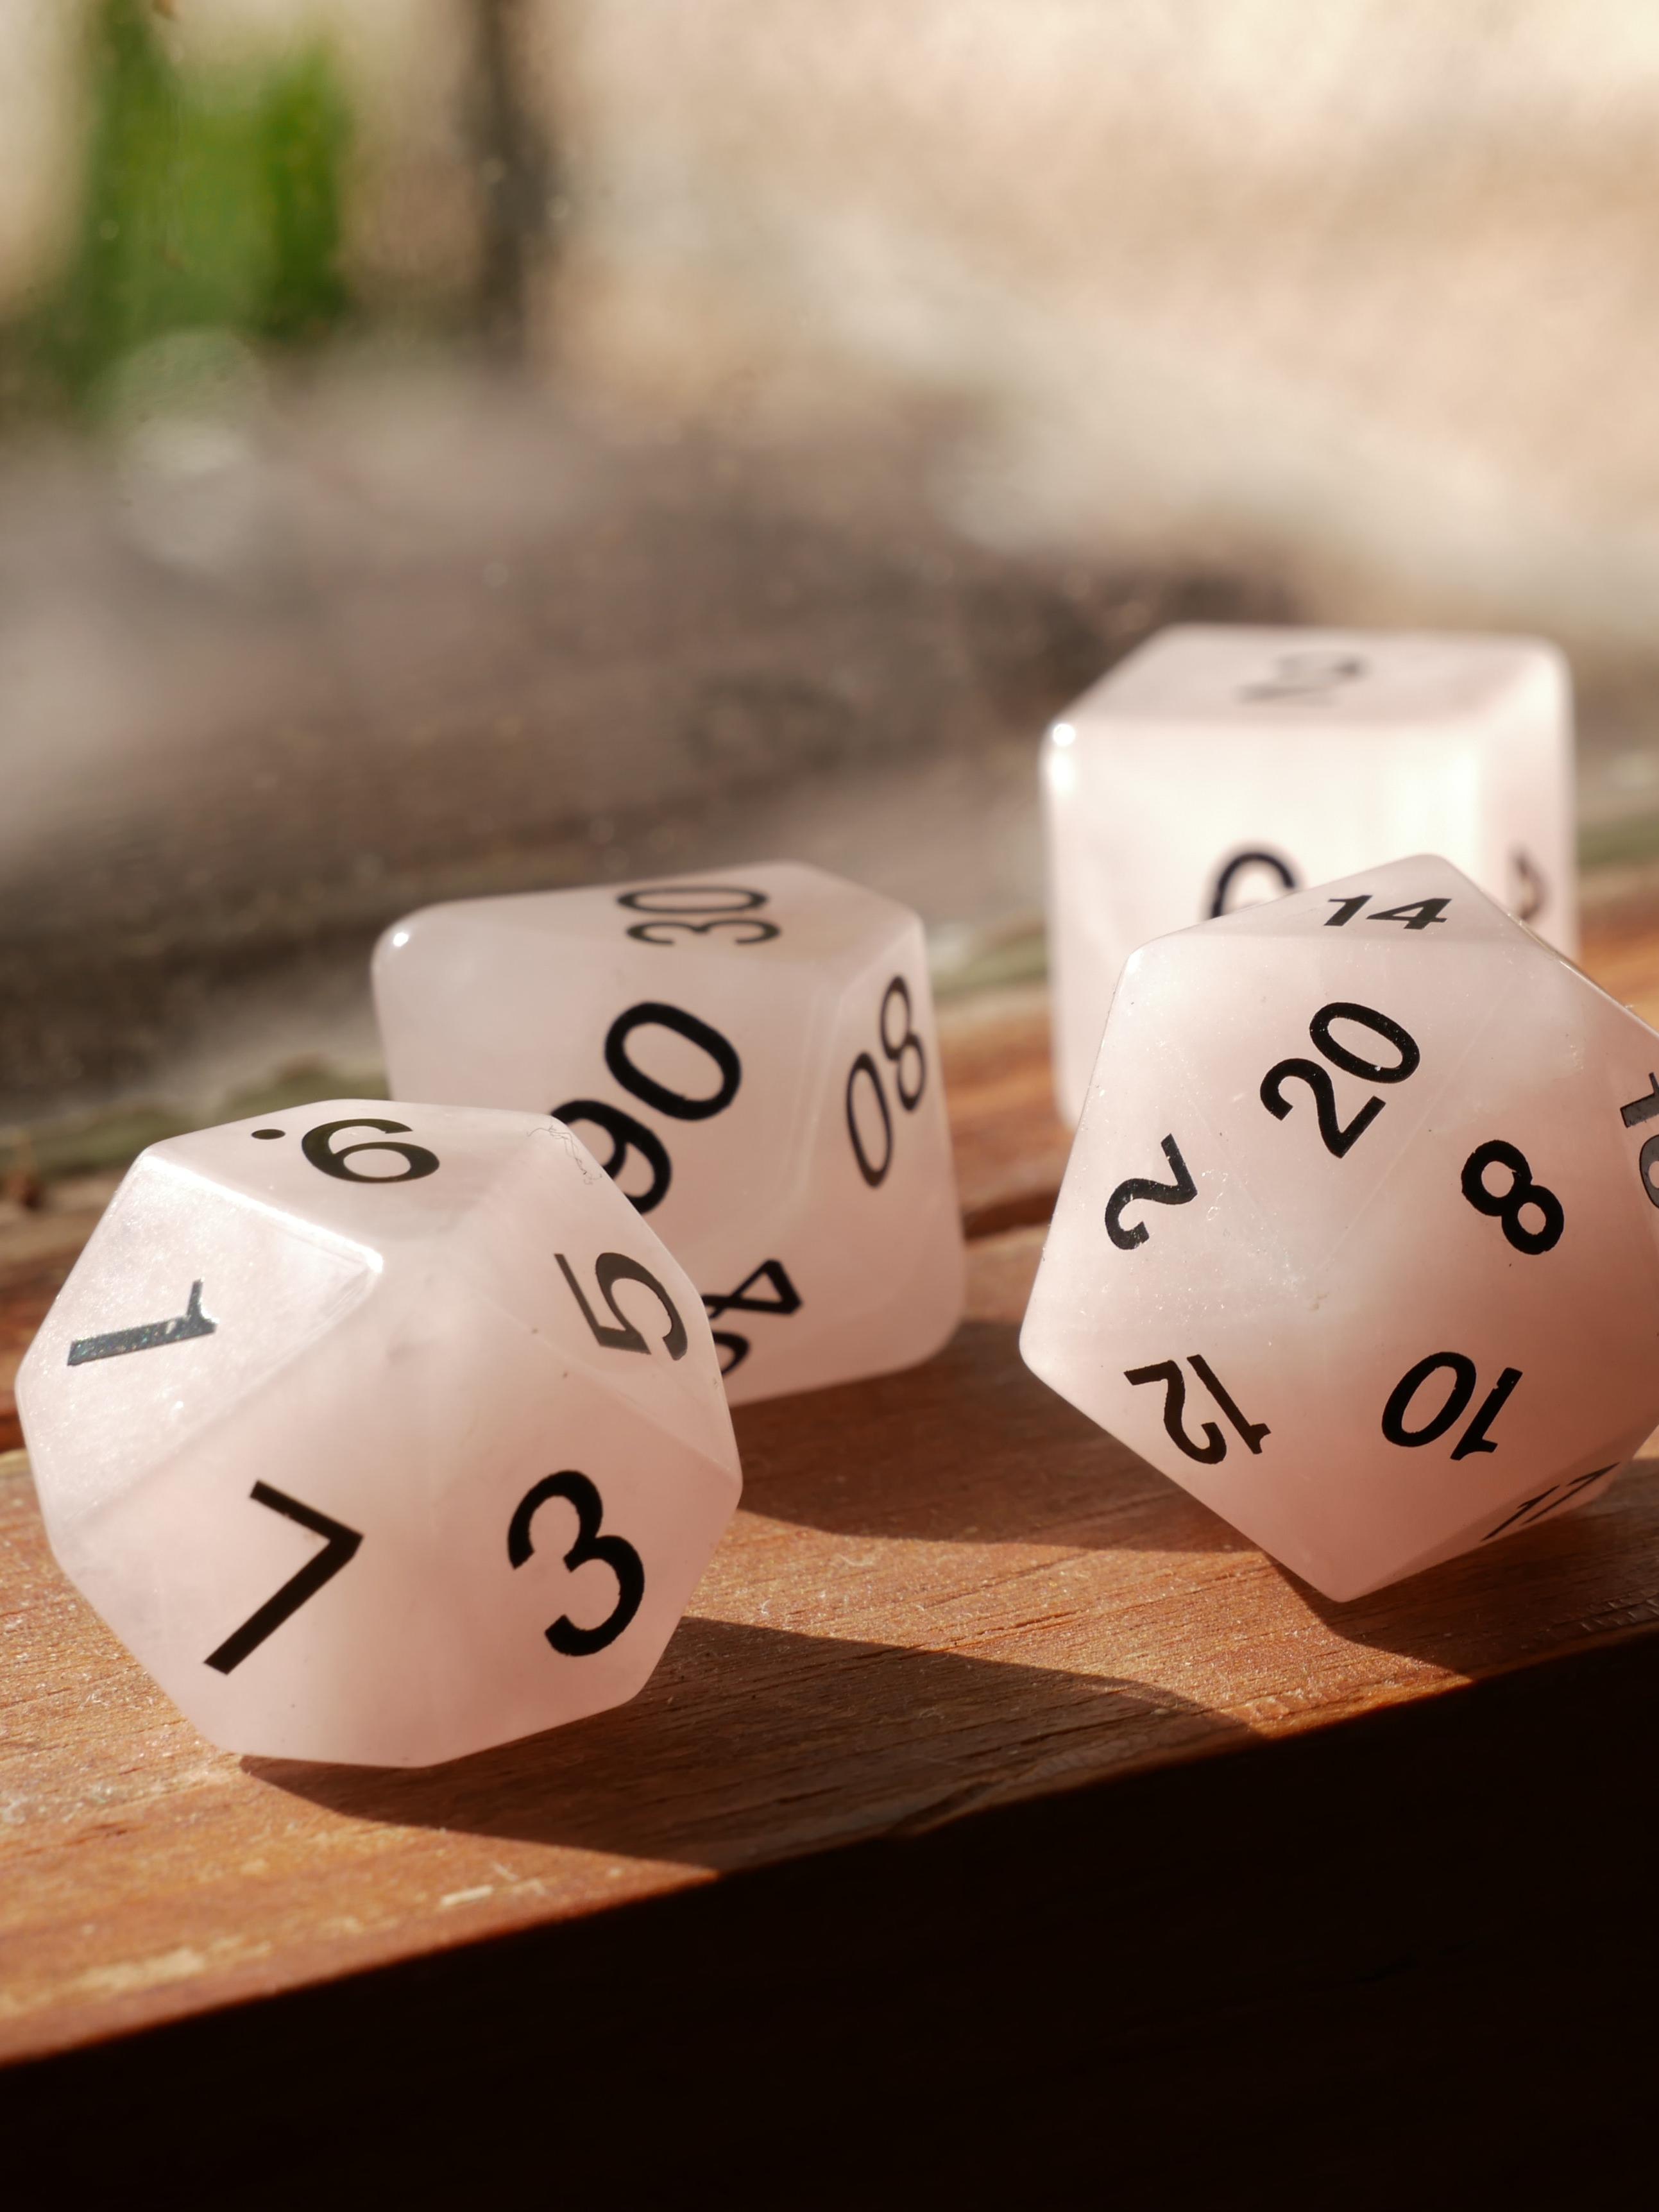 Rose colored acrylic dungeons and dragons dice